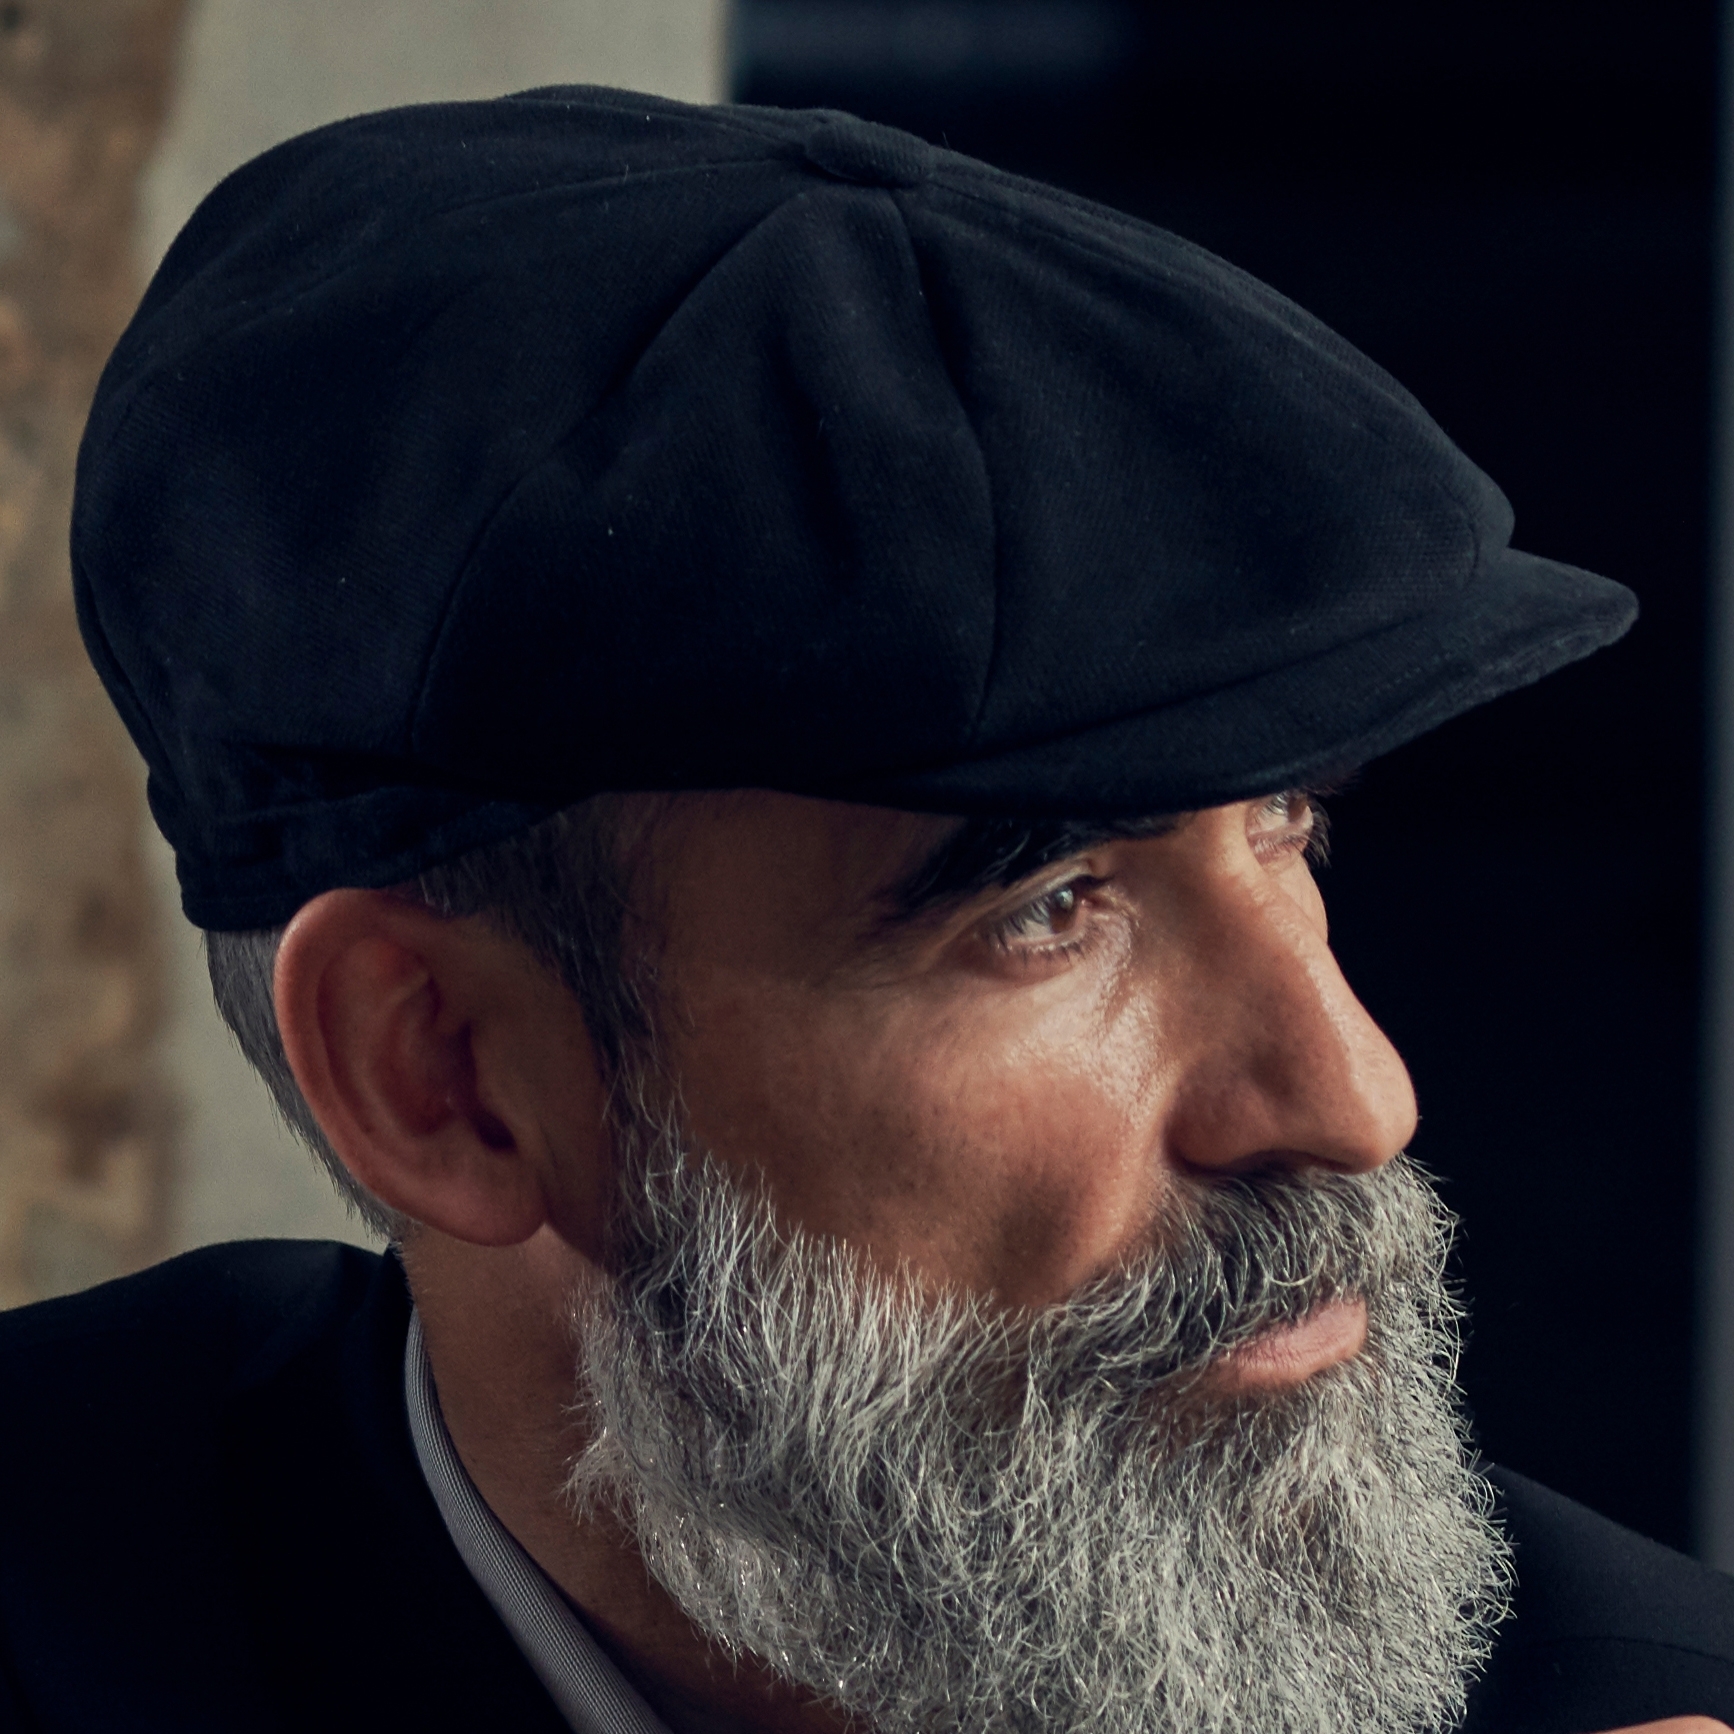 How To Wear A Flat Cap Without Looking Flat